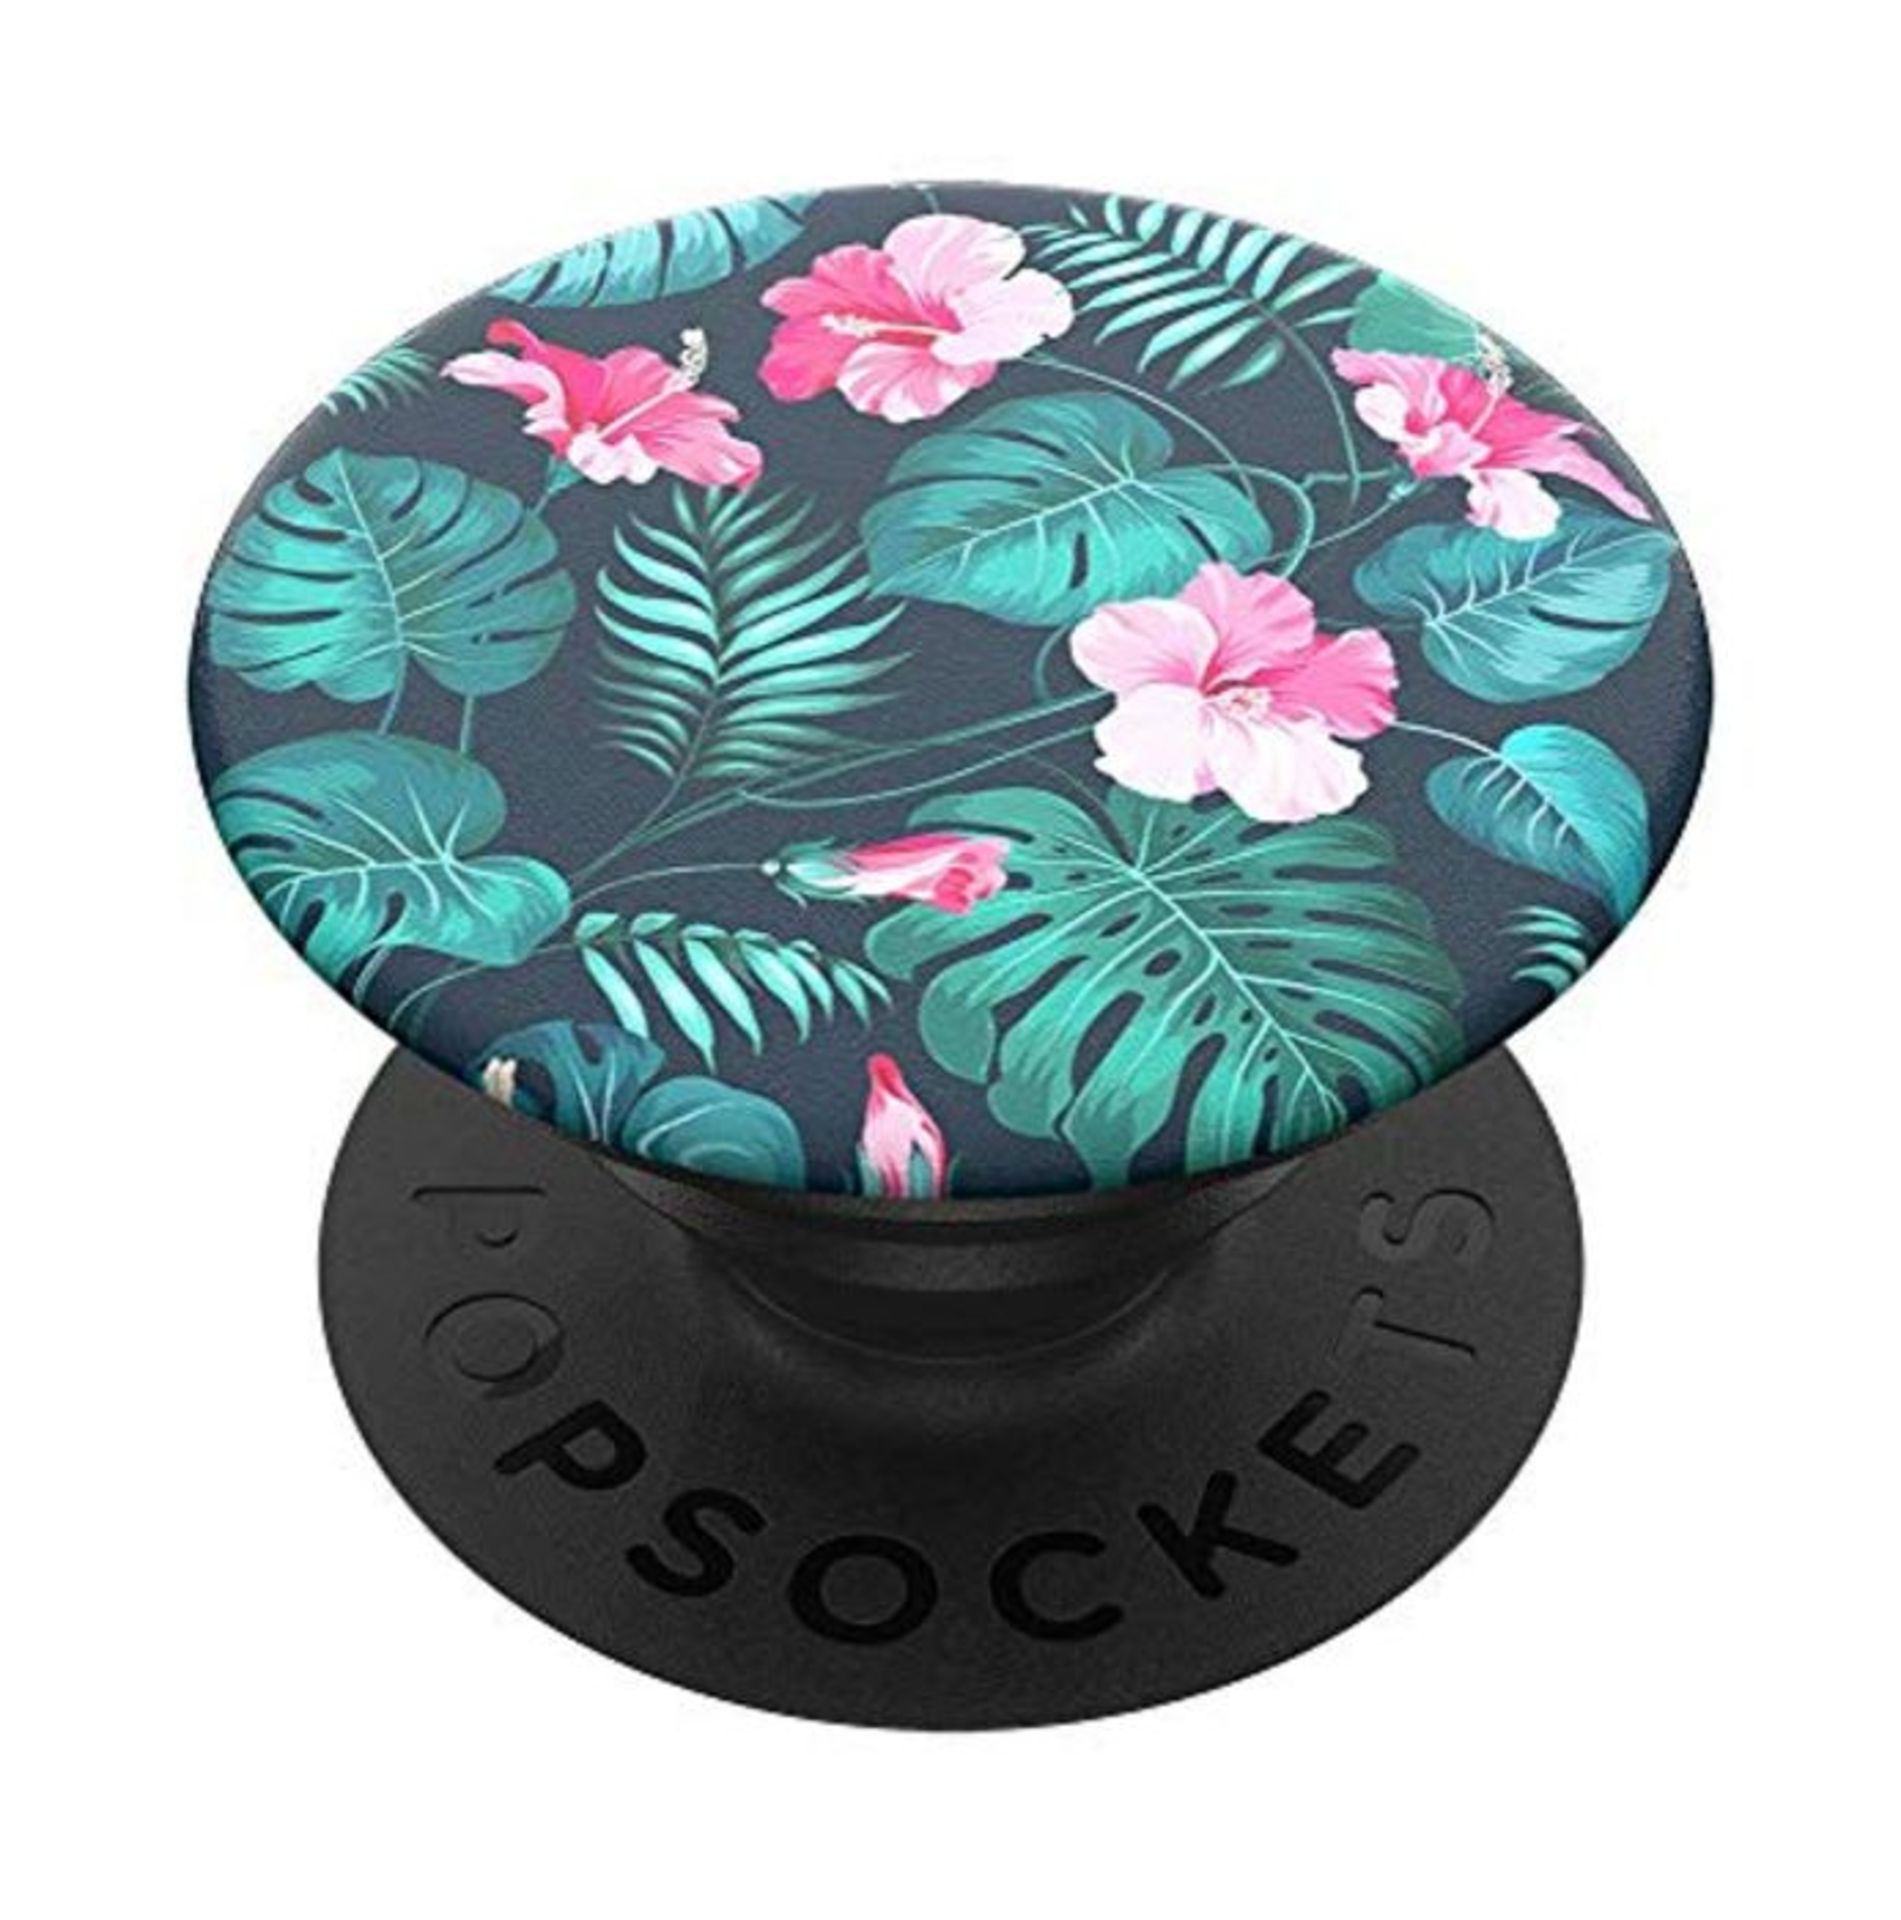 PopSockets: PopGrip Expanding Stand and Grip with a Swappable Top for Phones & Tablets